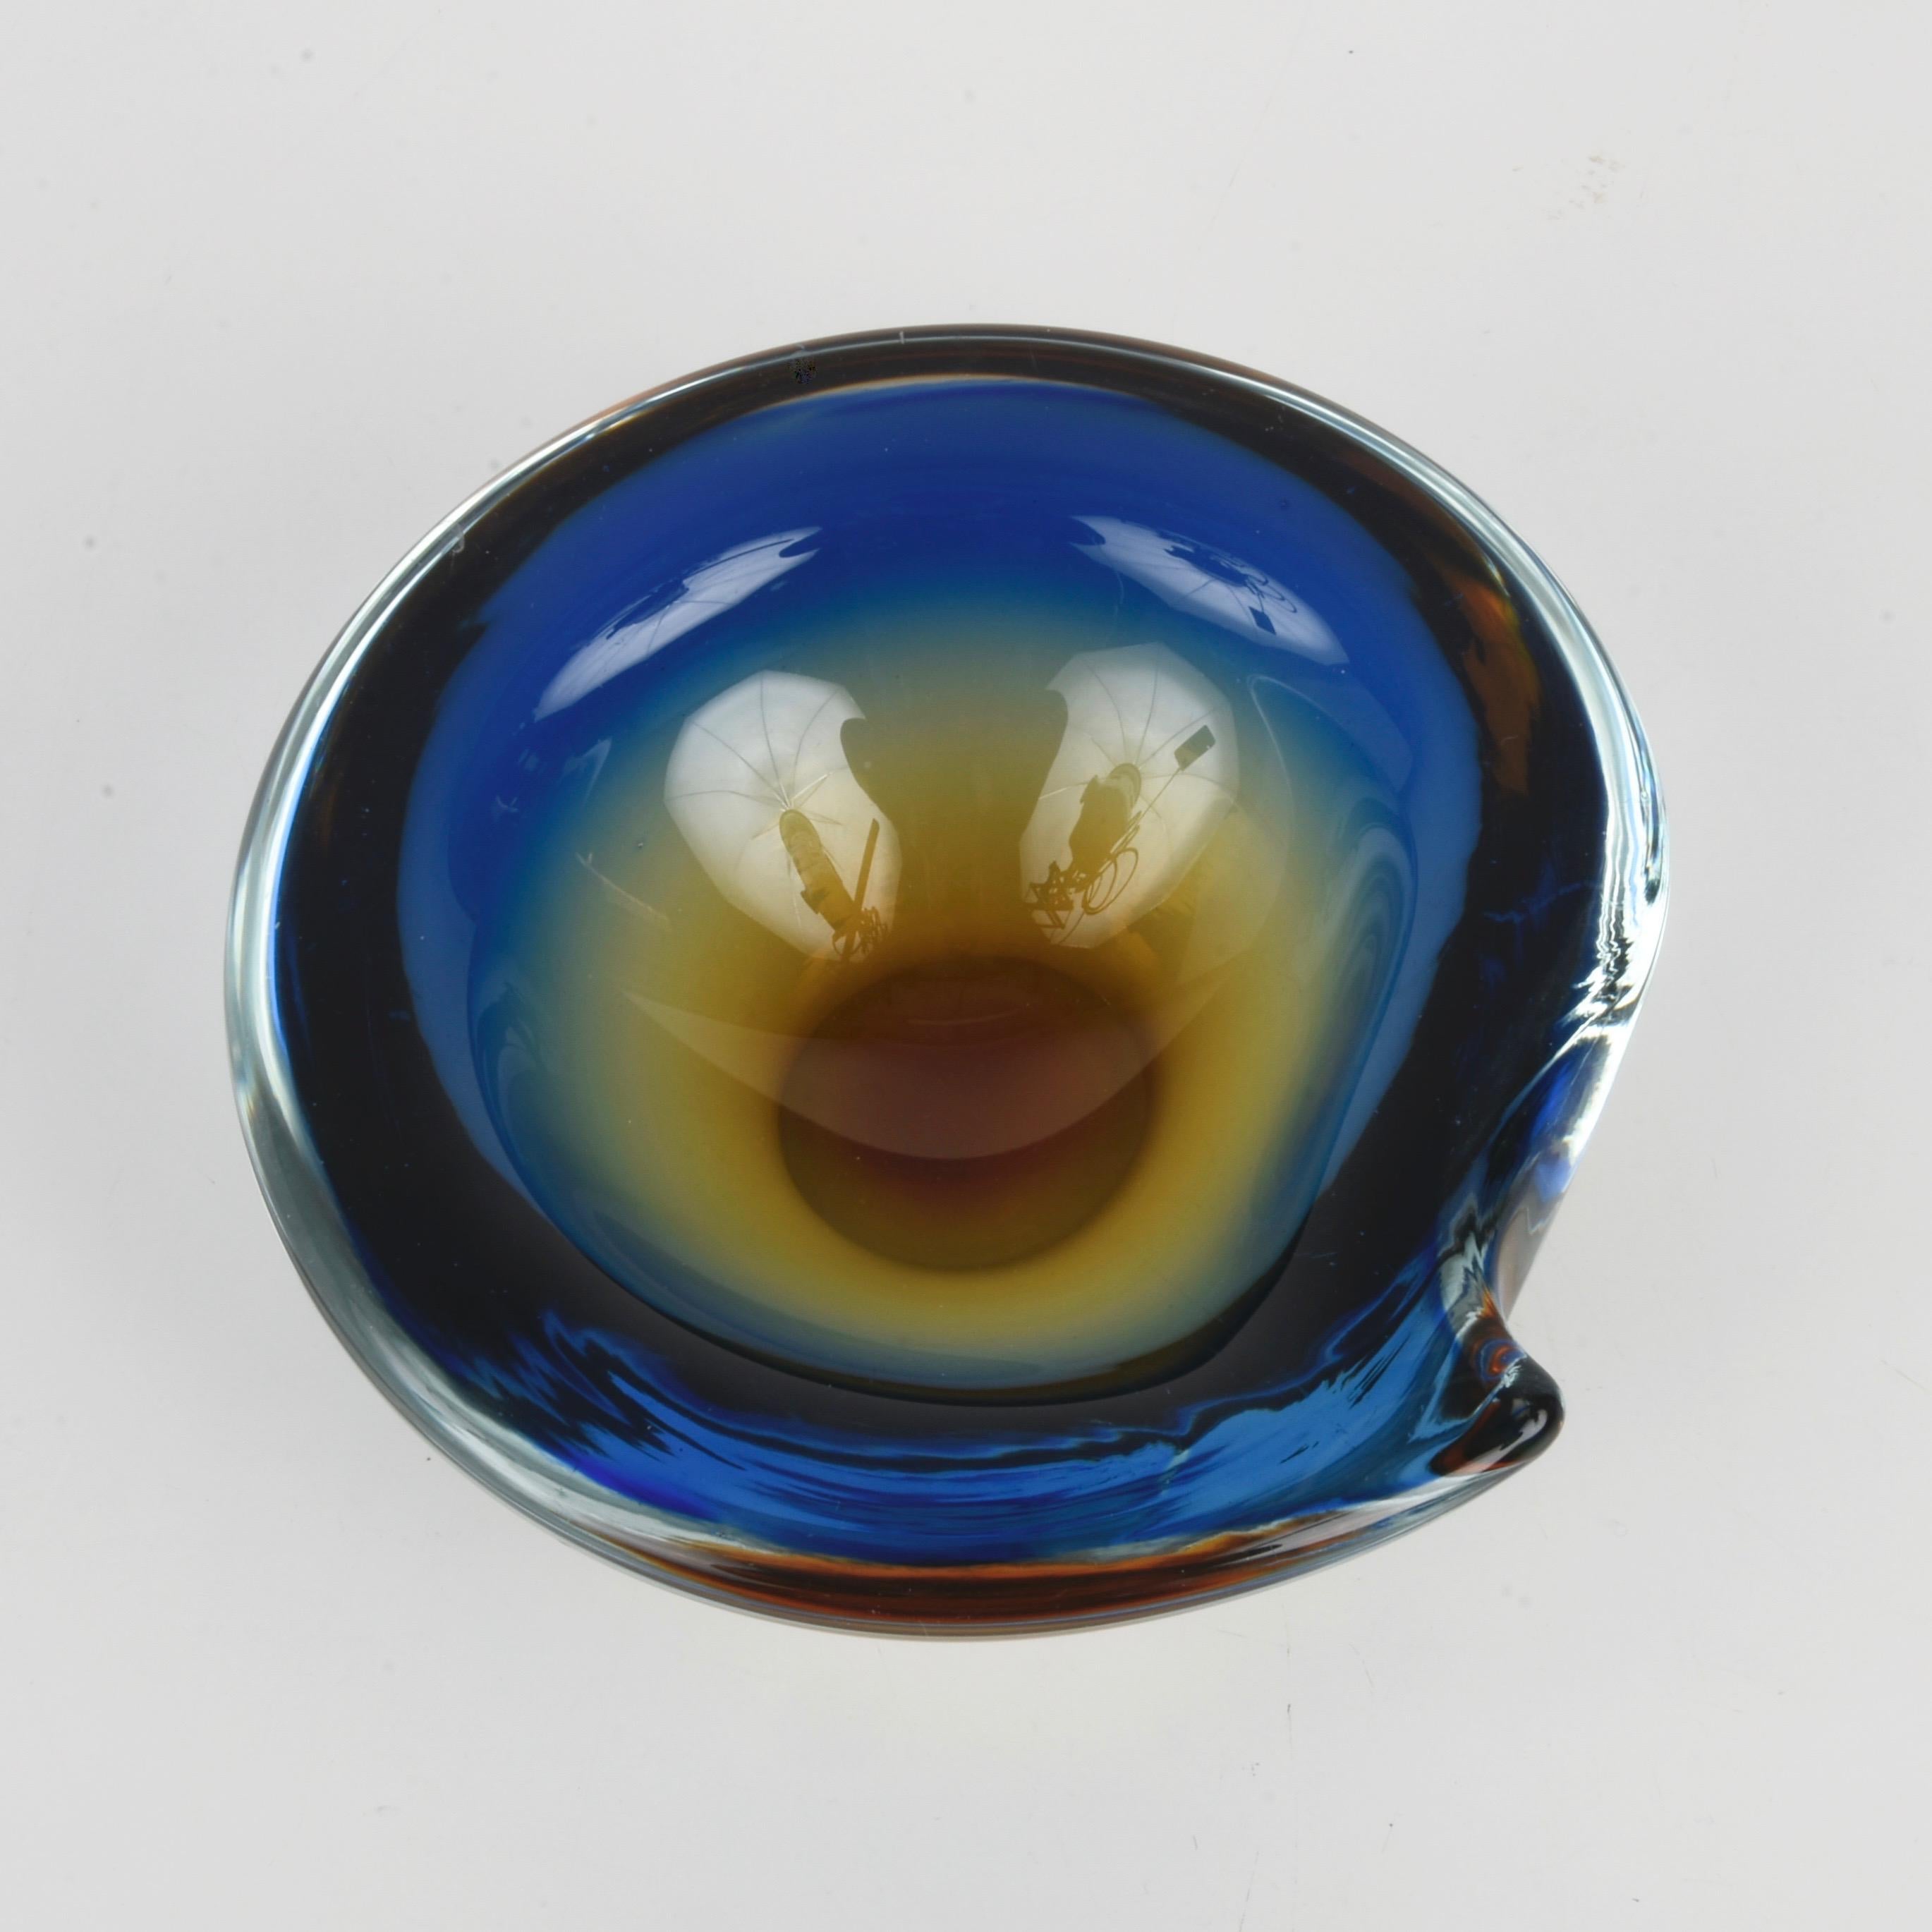 20th Century Murano Ashtray or Bowl, Flavio Poli Submerged Glass Amber Blue, Italy, 1960 For Sale